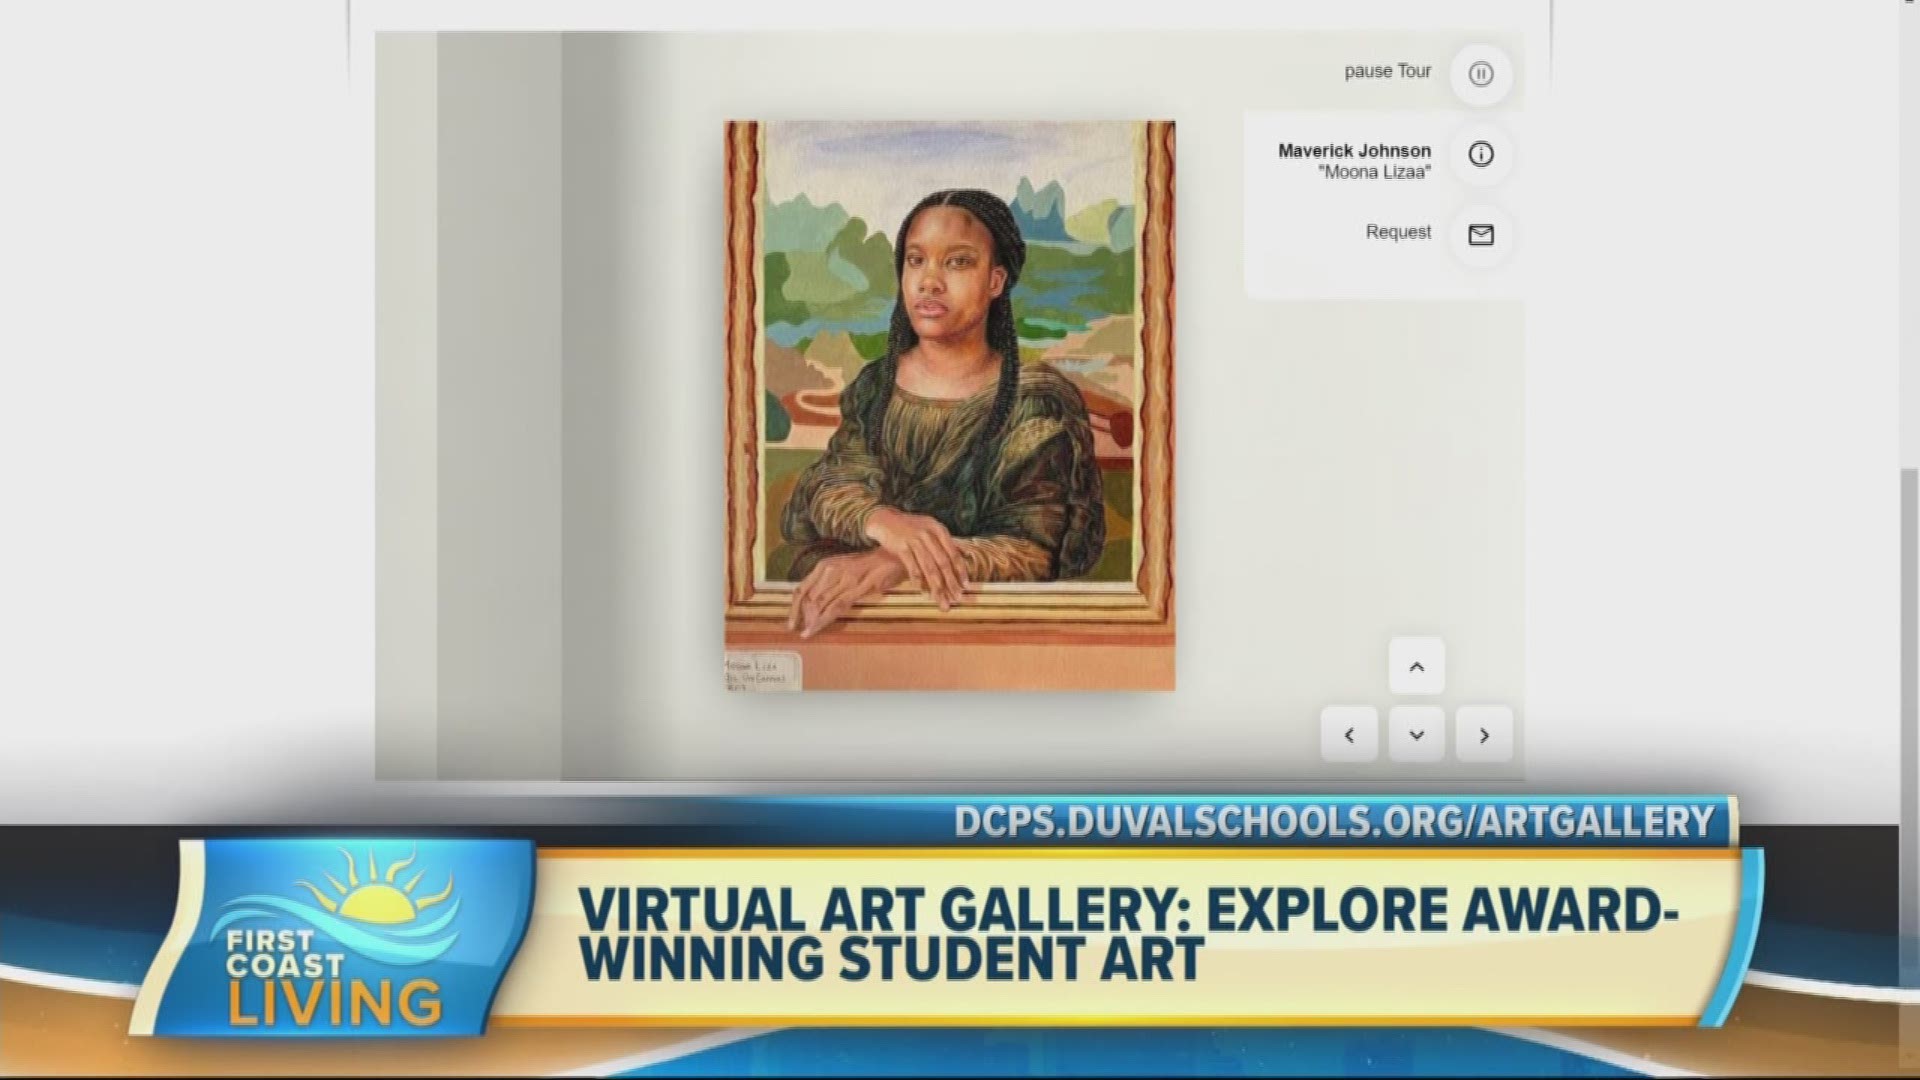 Get a glimpse of award-winning student art while at home!